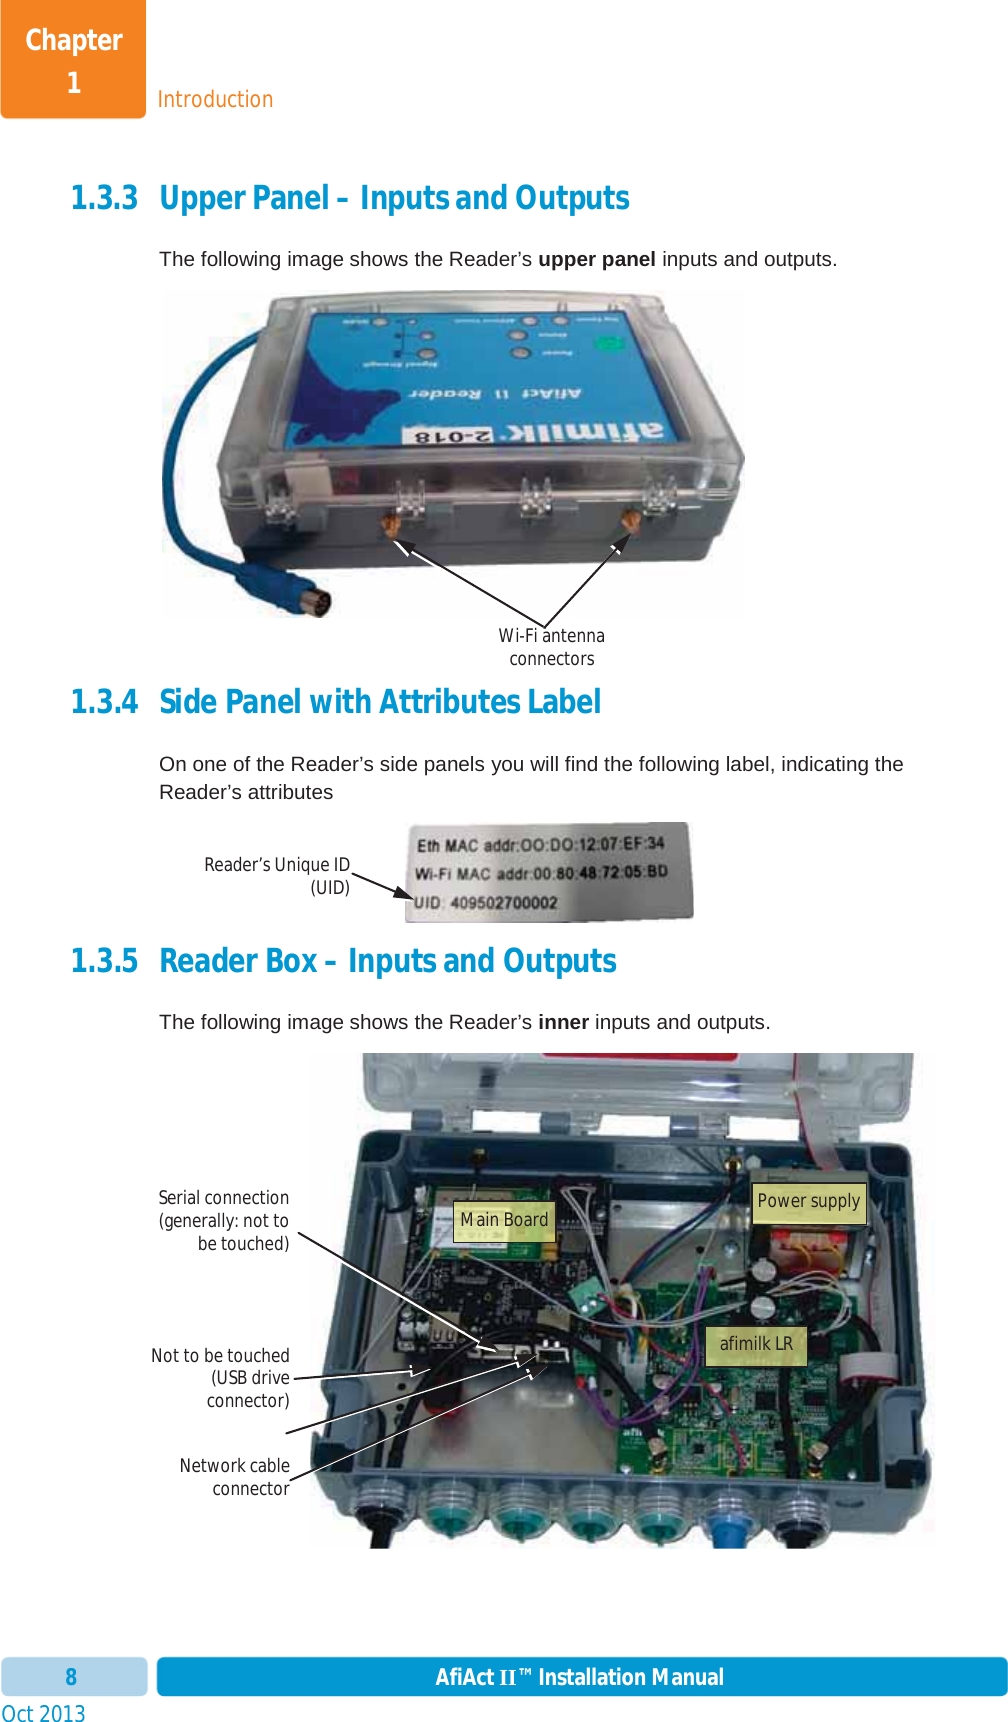 IntroductionChapter 1Oct 2013 AfiAct II™ Installation Manual81.3.3 Upper Panel – Inputs and Outputs  The following image shows the Reader’s upper panel inputs and outputs. 1.3.4 Side Panel with Attributes Label On one of the Reader’s side panels you will find the following label, indicating the Reader’s attributes 1.3.5 Reader Box – Inputs and Outputs  The following image shows the Reader’s inner inputs and outputs. Network cableconnectorNot to be touched(USB driveconnector)Serial connection(generally: not tobe touched)Wi-Fi antenna connectors Main Boardafimilk LRPower supplyReader’s Unique ID(UID)